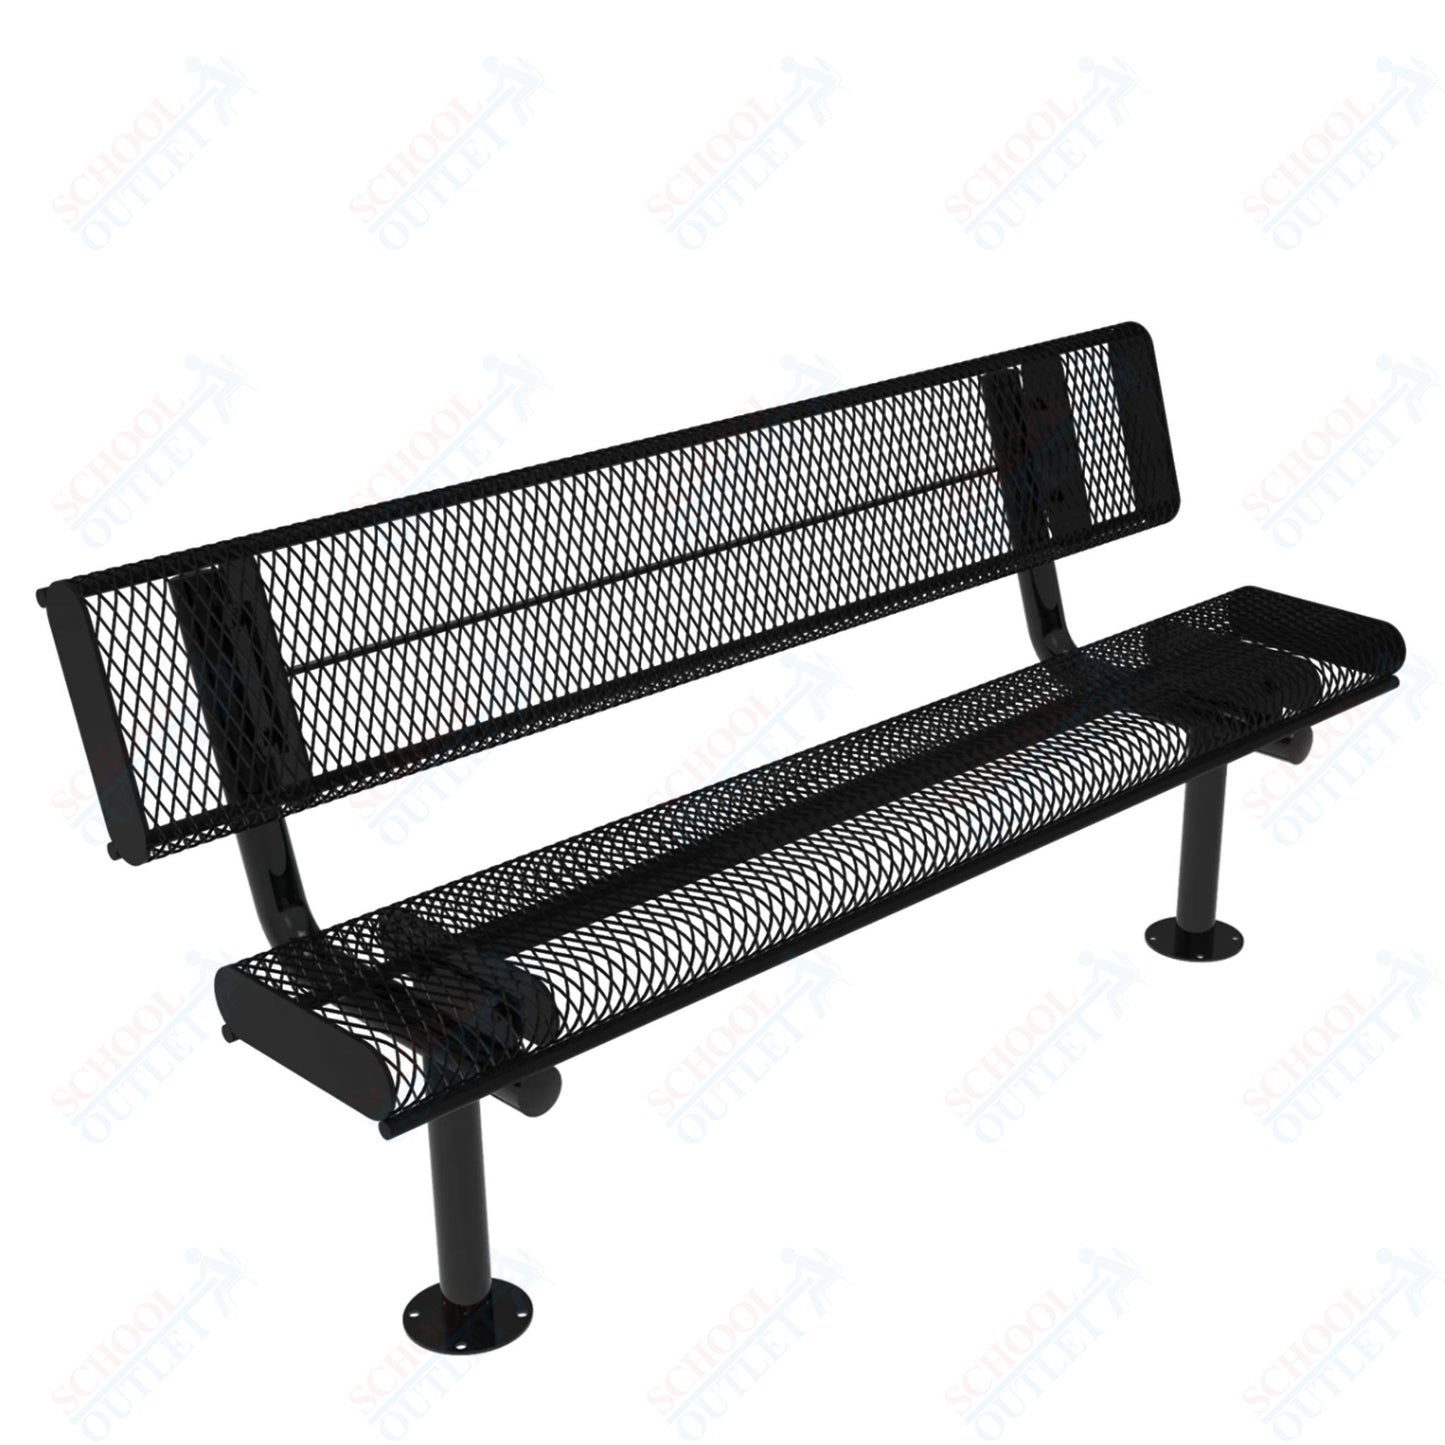 MyTcoat - Rolled Edges Outdoor Bench with Back 6' L - Surface Mount (MYT-BRE06-20)